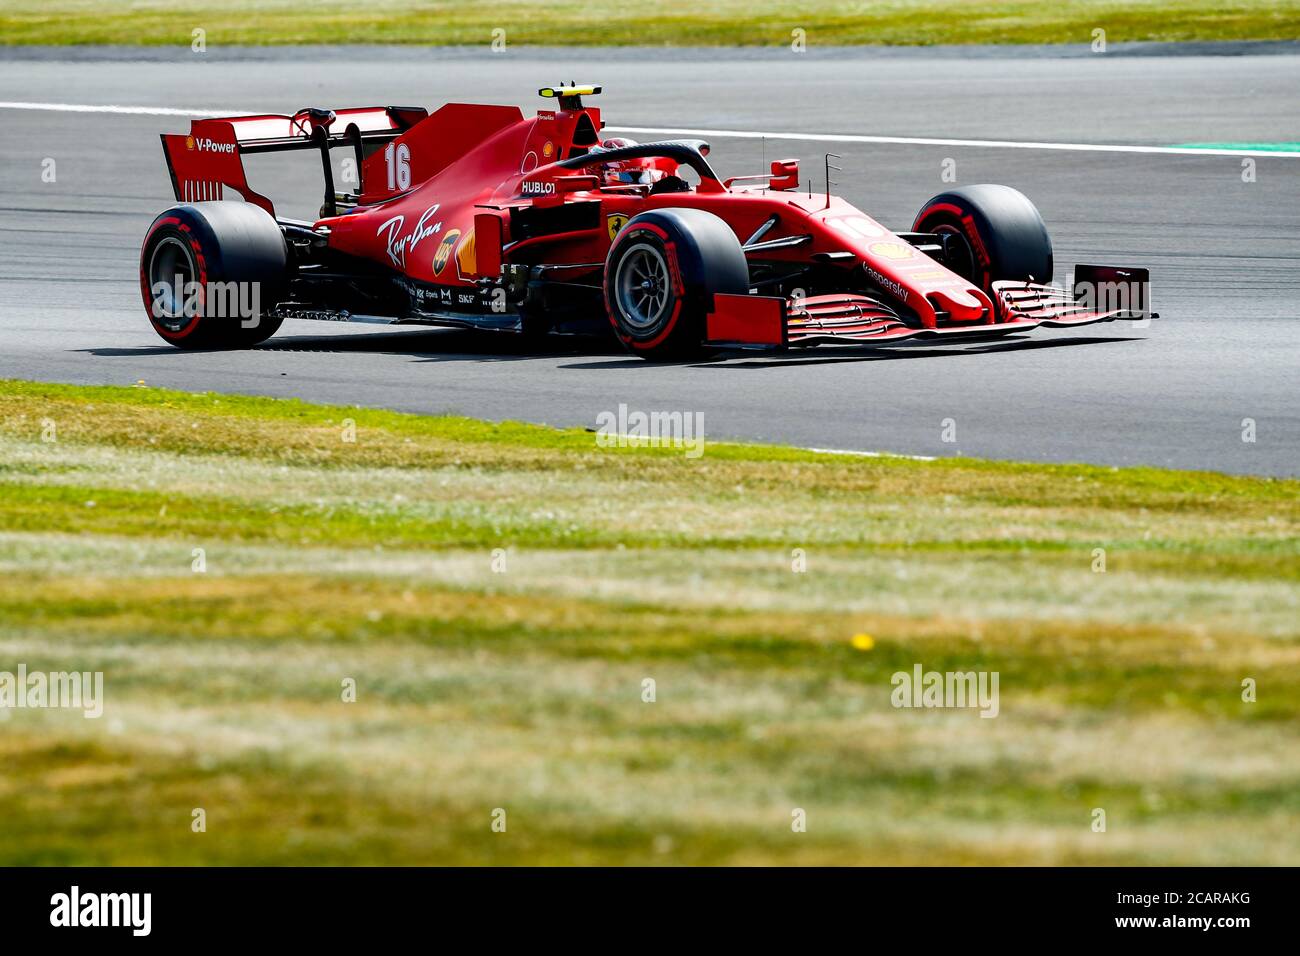 Scuderia Ferrari's Charles LeClerc during qualifying of the 70th Anniversary Formula One Grand Prix at Silverstone Race circuit, Northampton. Stock Photo